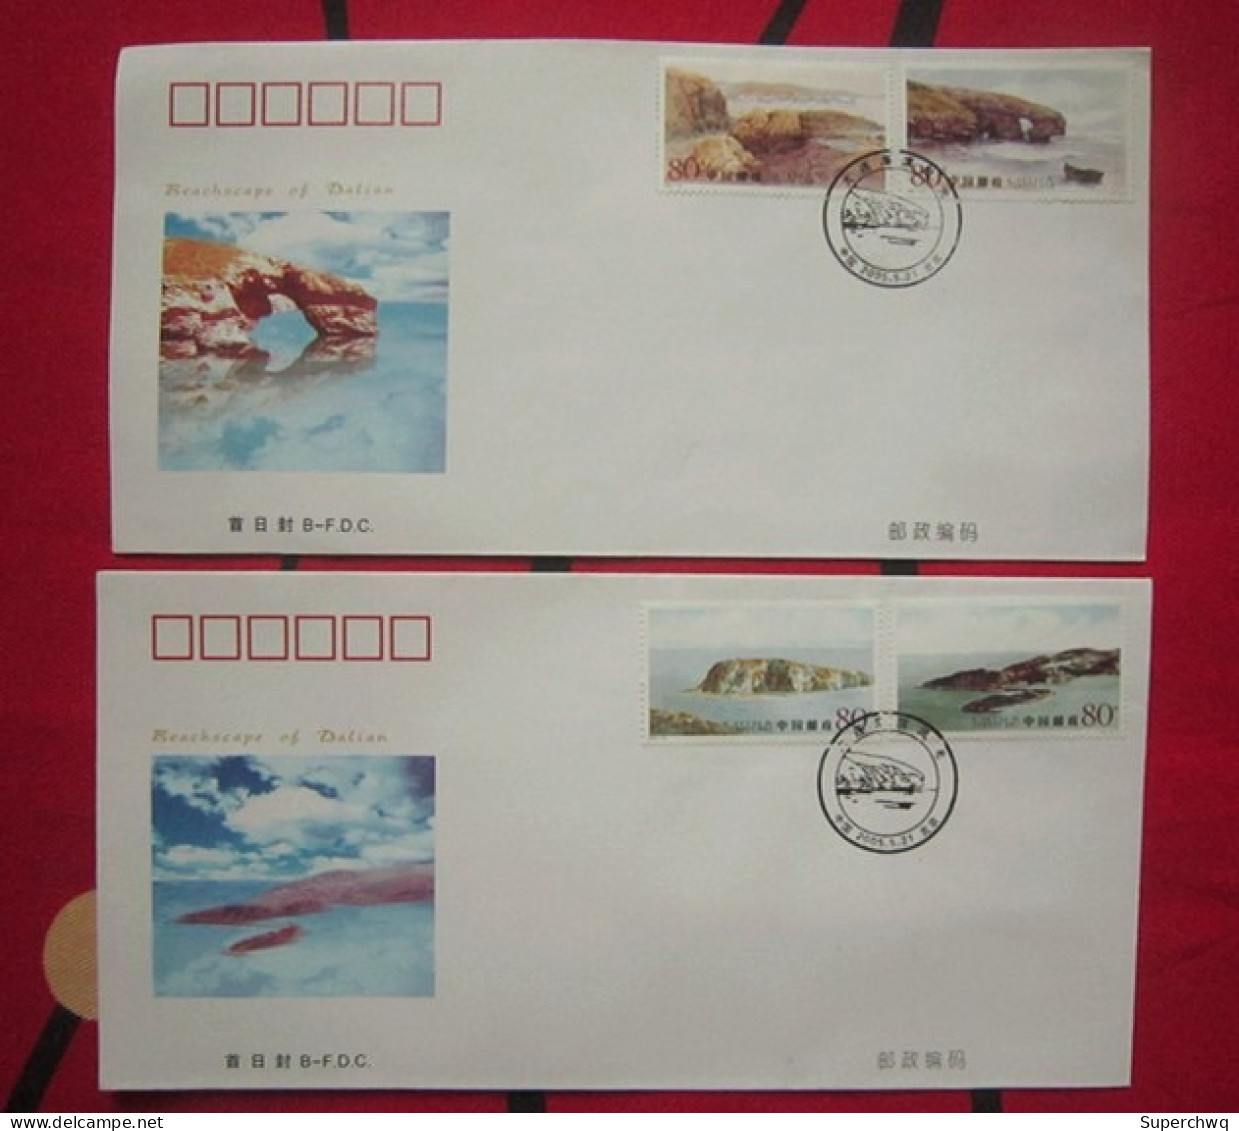 China B-FDC,2005-10 Dalian Coastal Scenery Special Stamps Beijing Company First Day Cover - 1980-1989